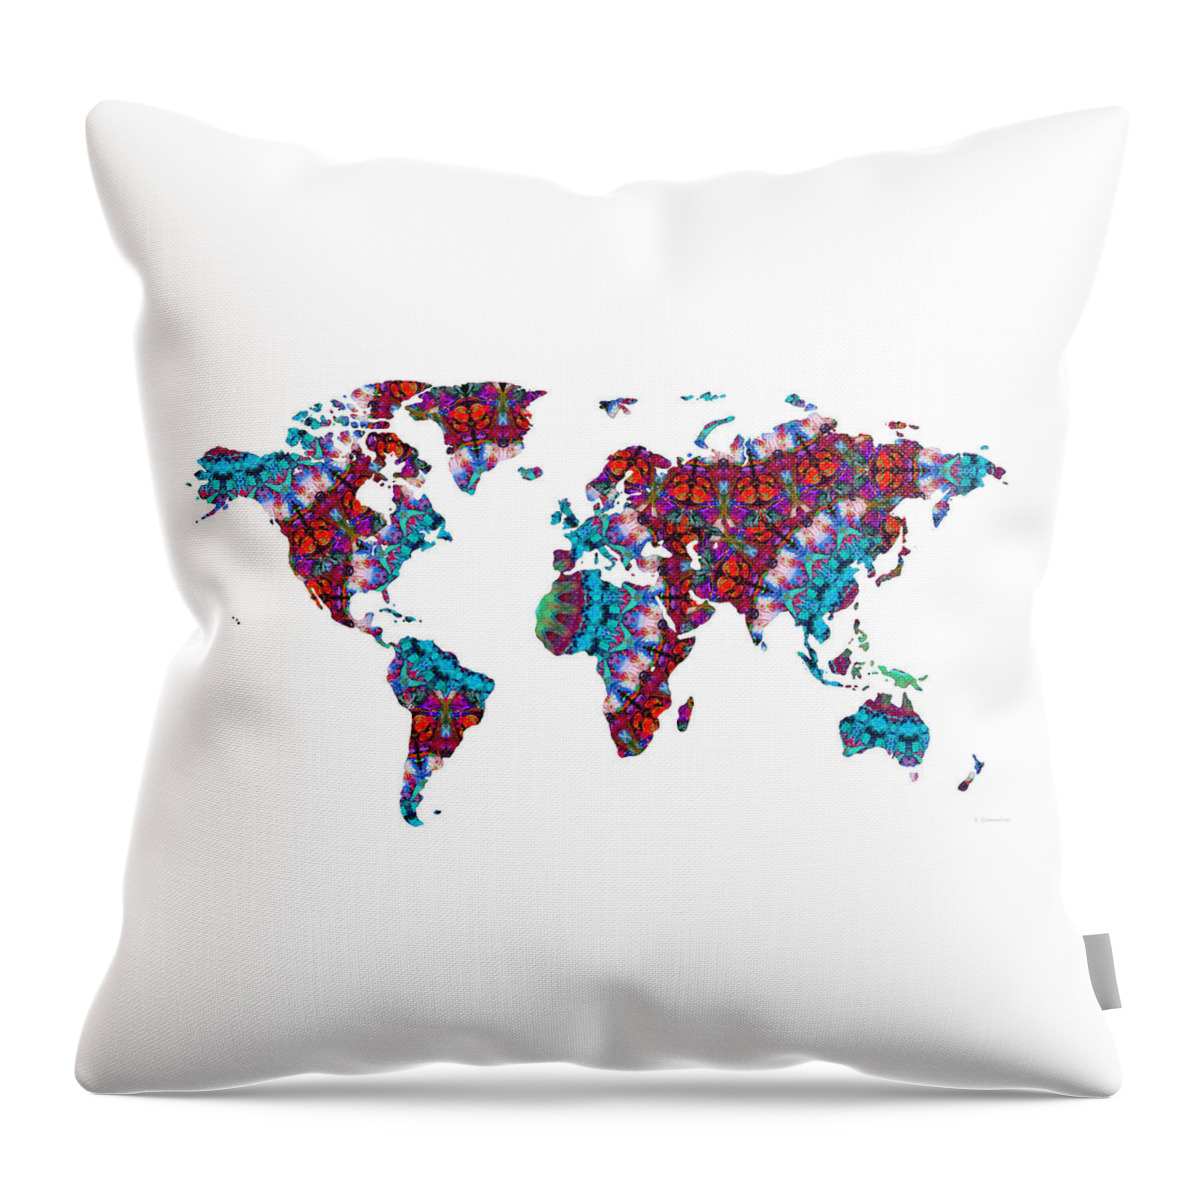 World Map Throw Pillow featuring the painting Colorful Map Of The World 35 - Mandala Art - Sharon Cummings by Sharon Cummings